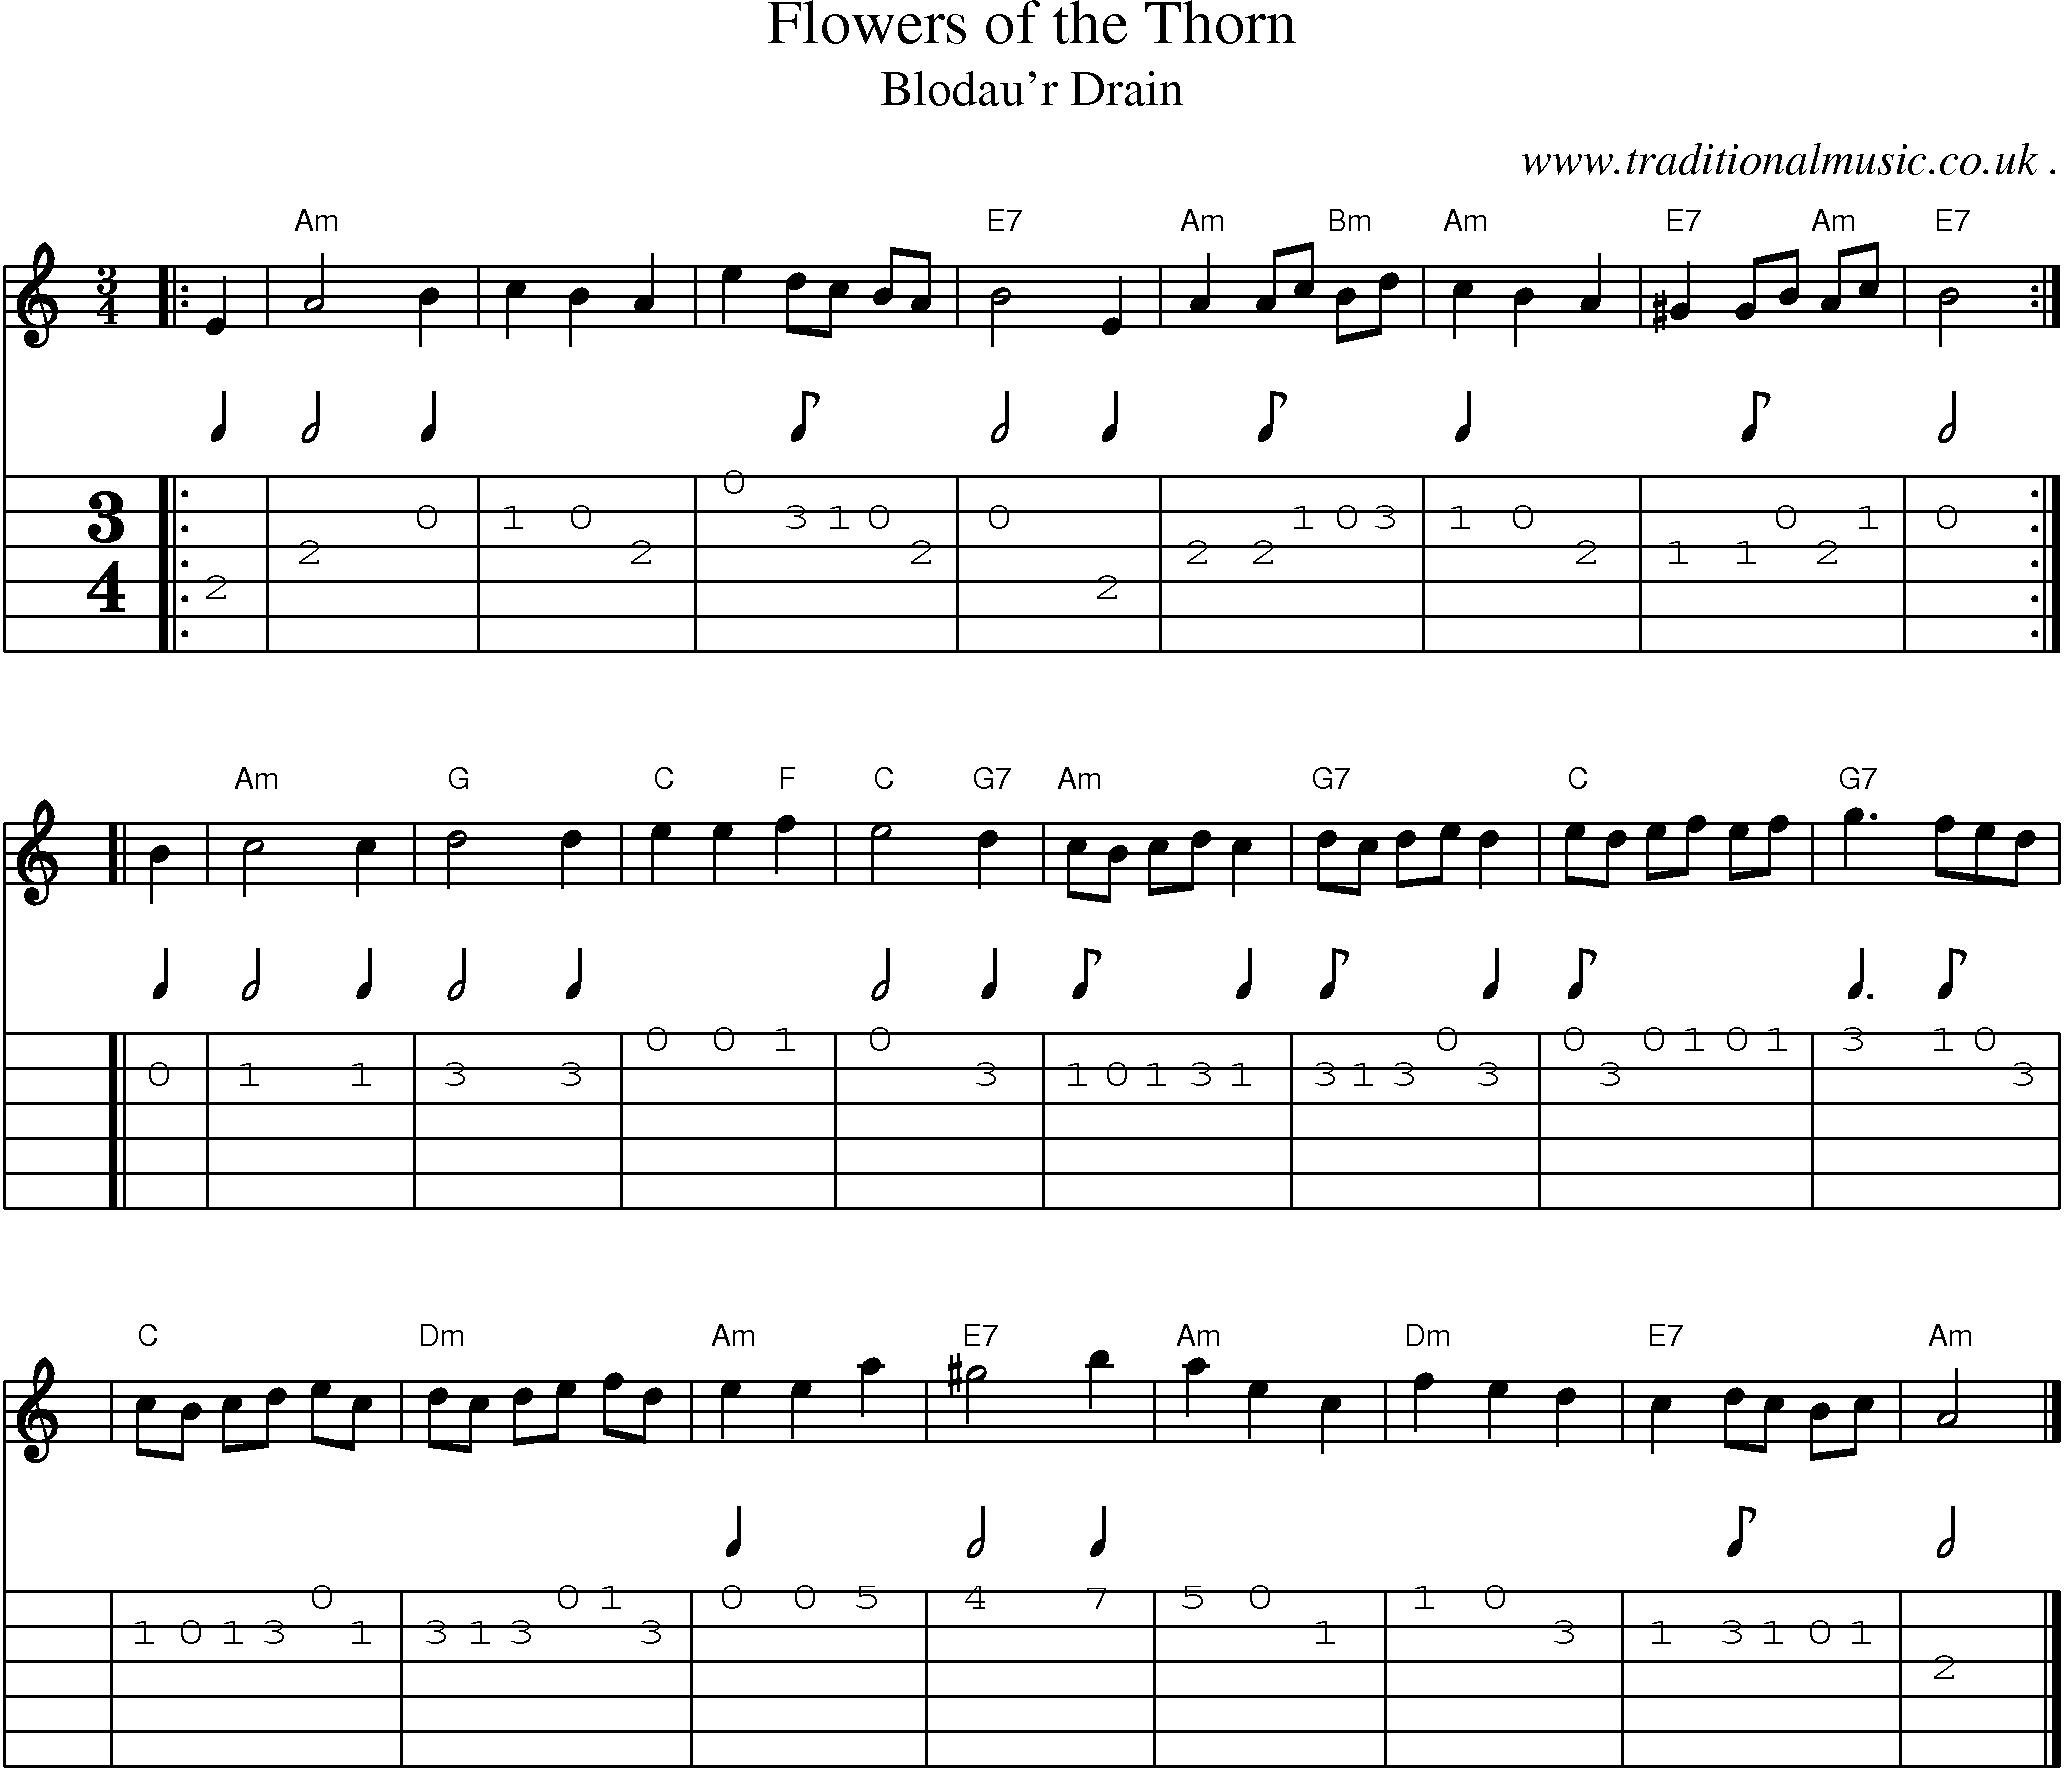 Sheet-music  score, Chords and Guitar Tabs for Flowers Of The Thorn